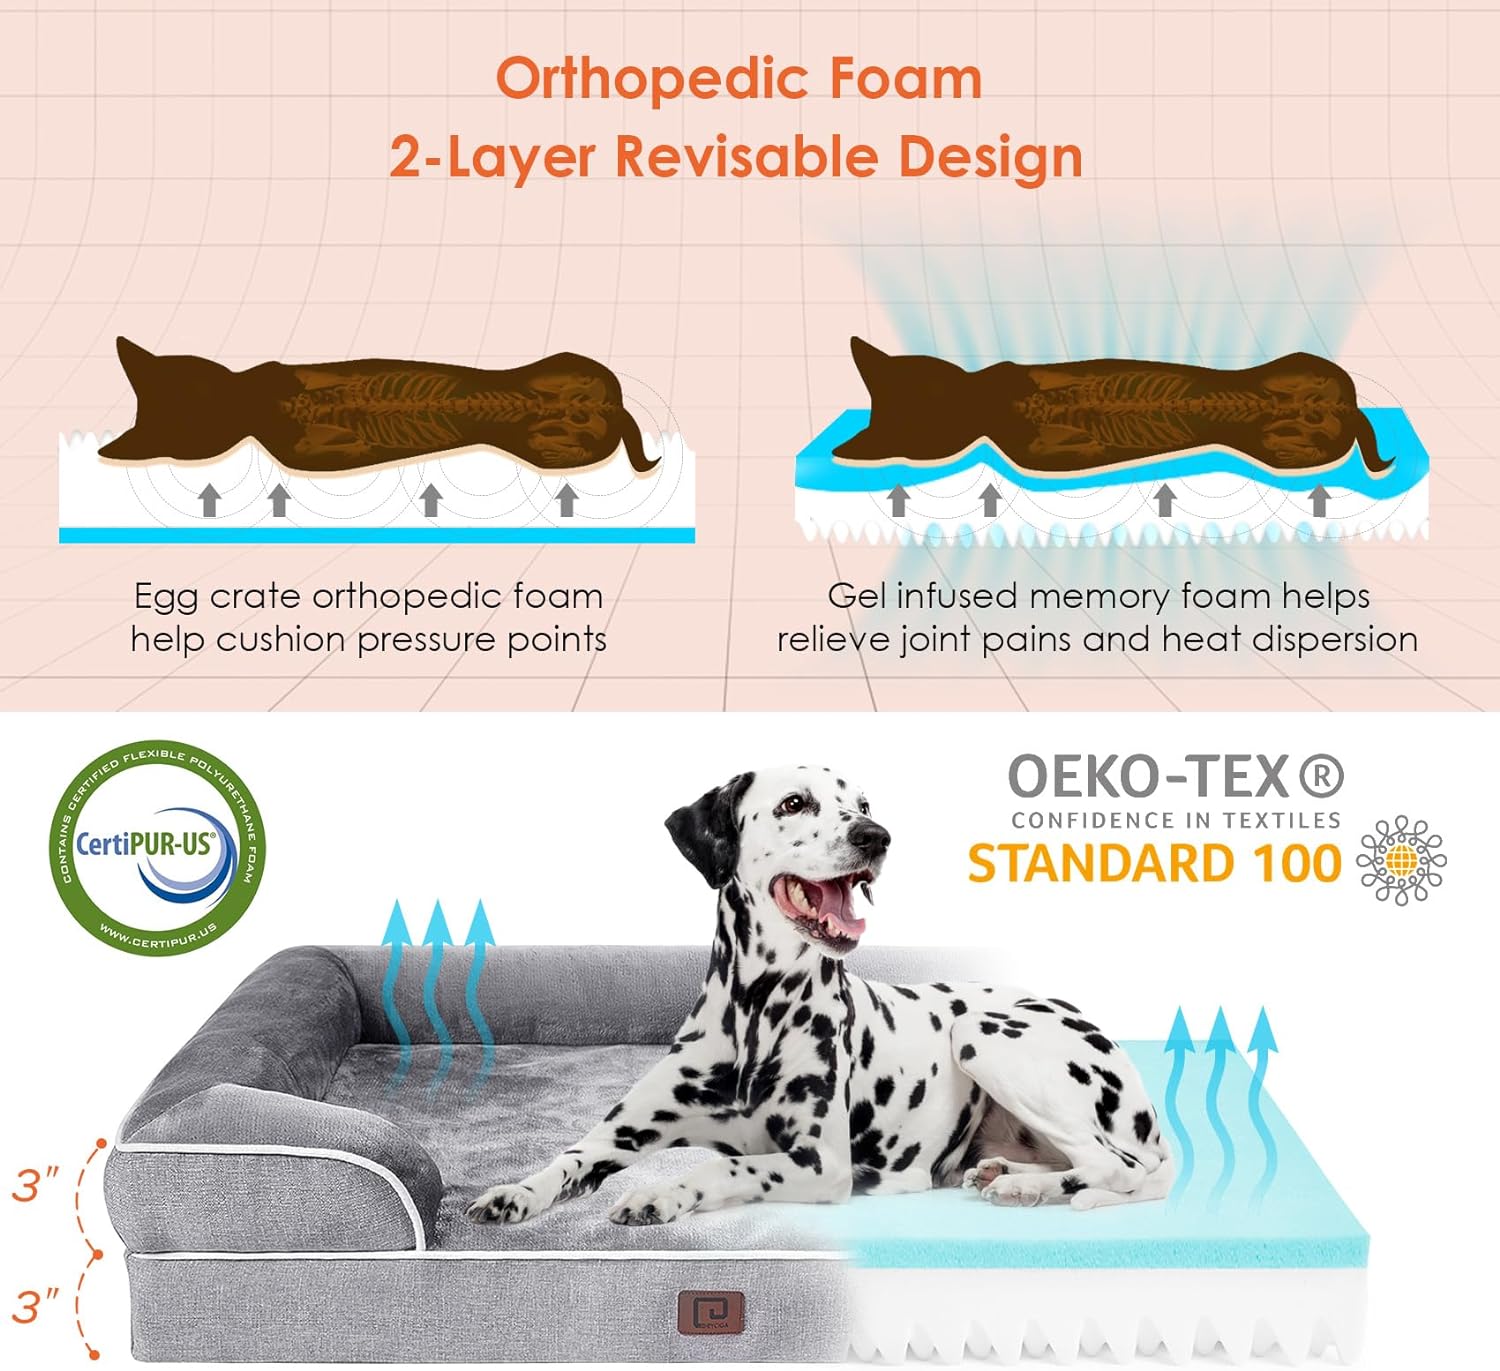 EHEYCIGA Orthopedic Dog Beds for Extra Large Dogs, Waterproof Memory Foam XL Dog Bed with Sides, Non-Slip Bottom and Egg-Crate Foam Big Dog Couch Bed with Washable Removable Cover, Grey